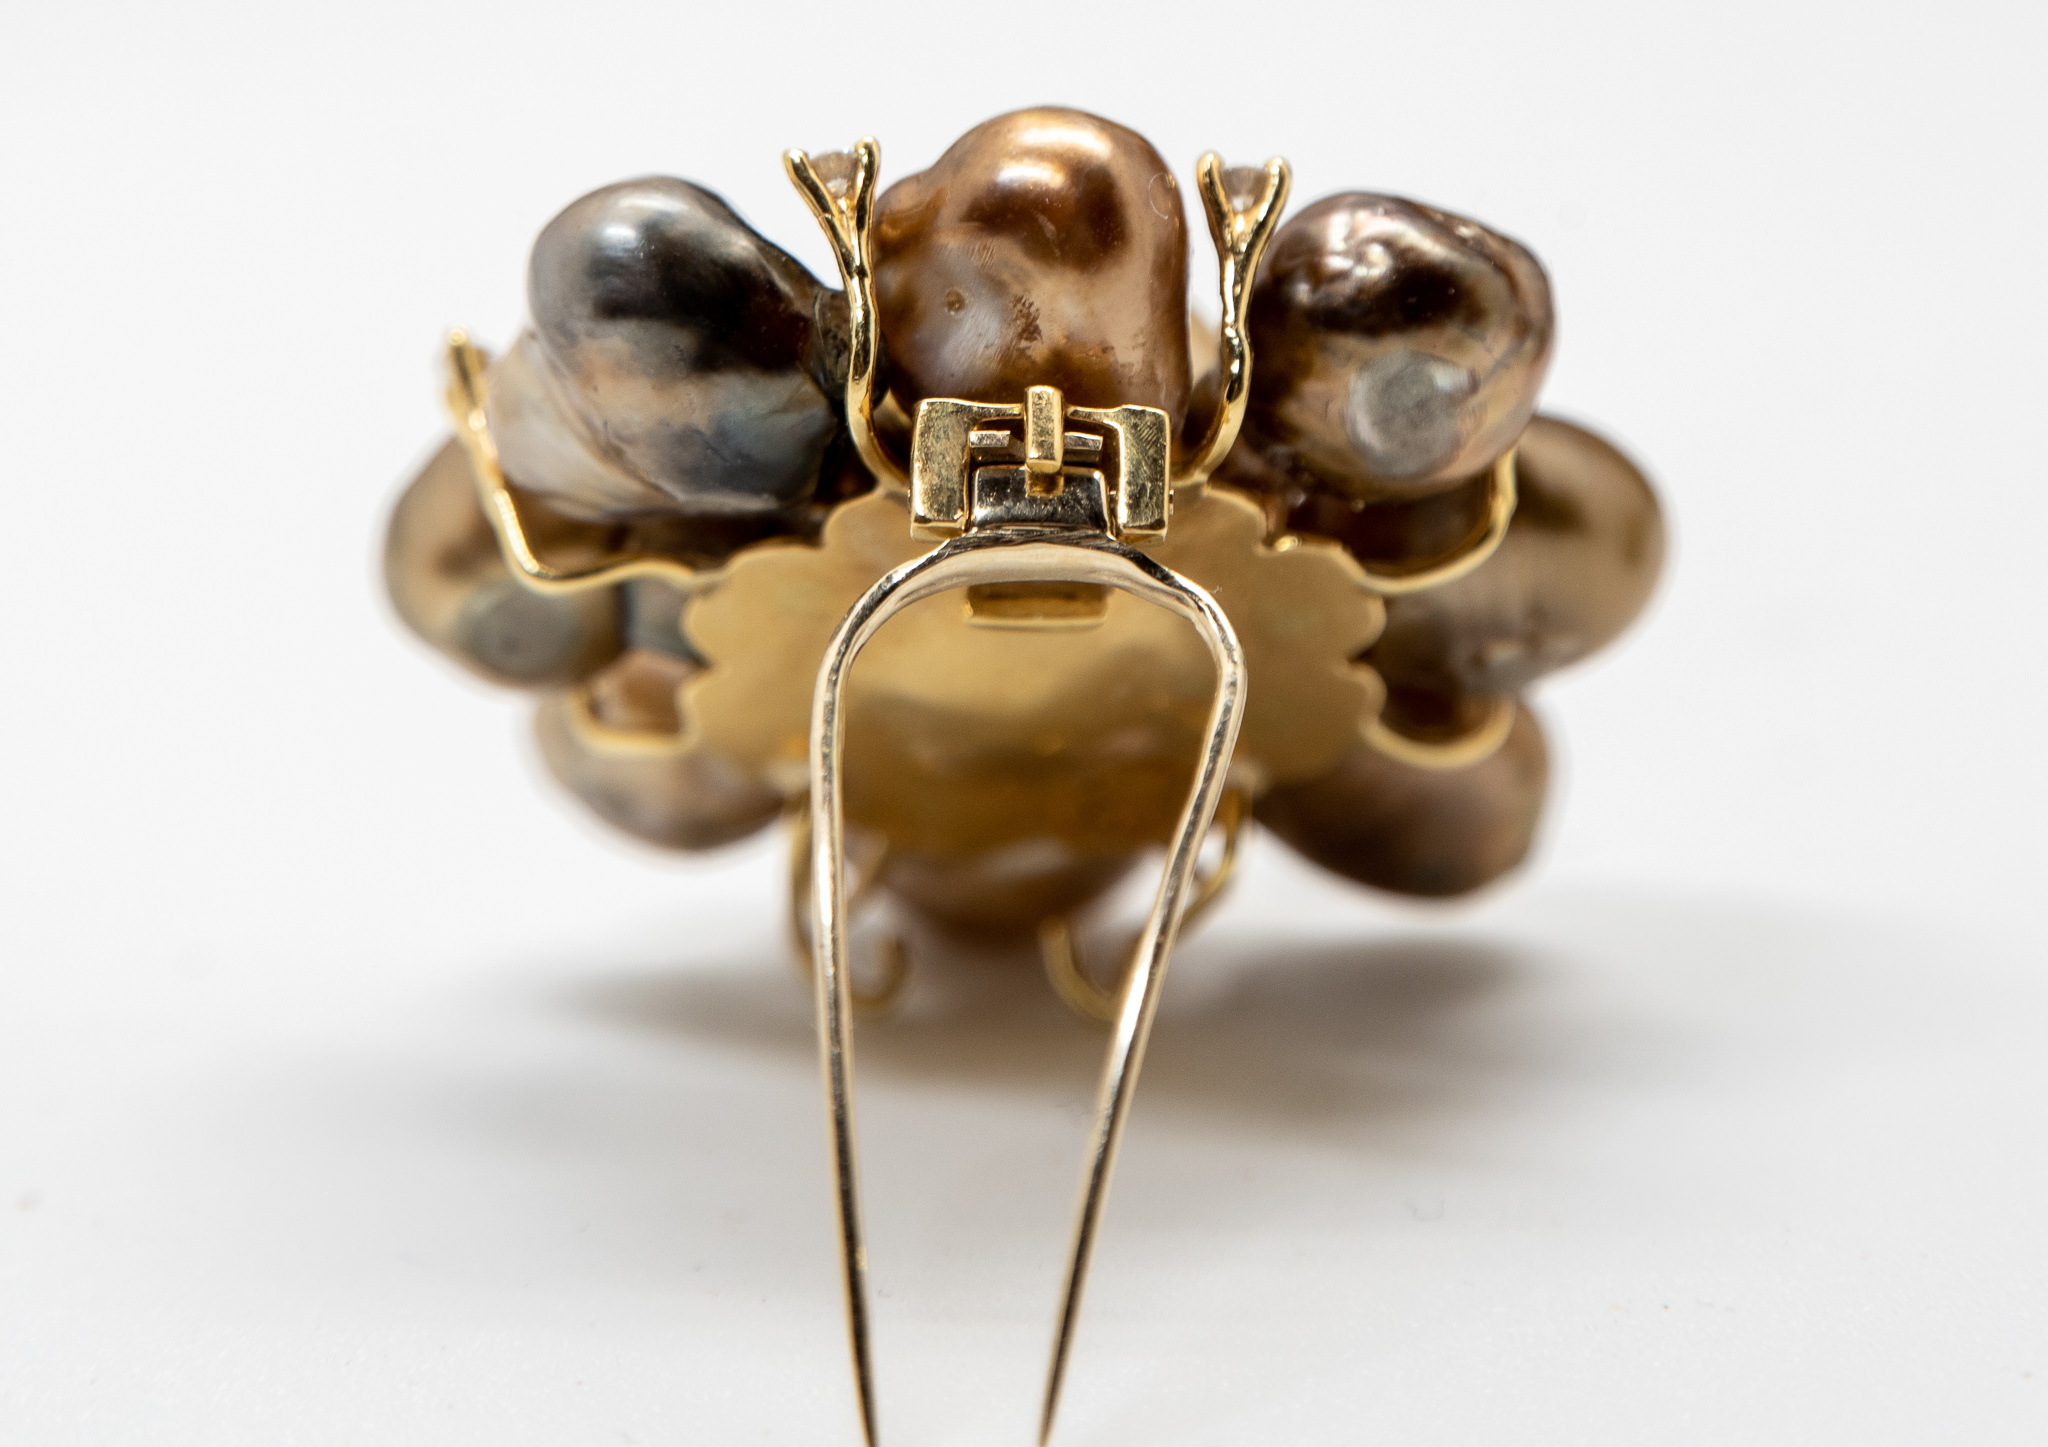 Tahitian pearl brooch showing 18K yellow gold pin mechanism and back of brooch